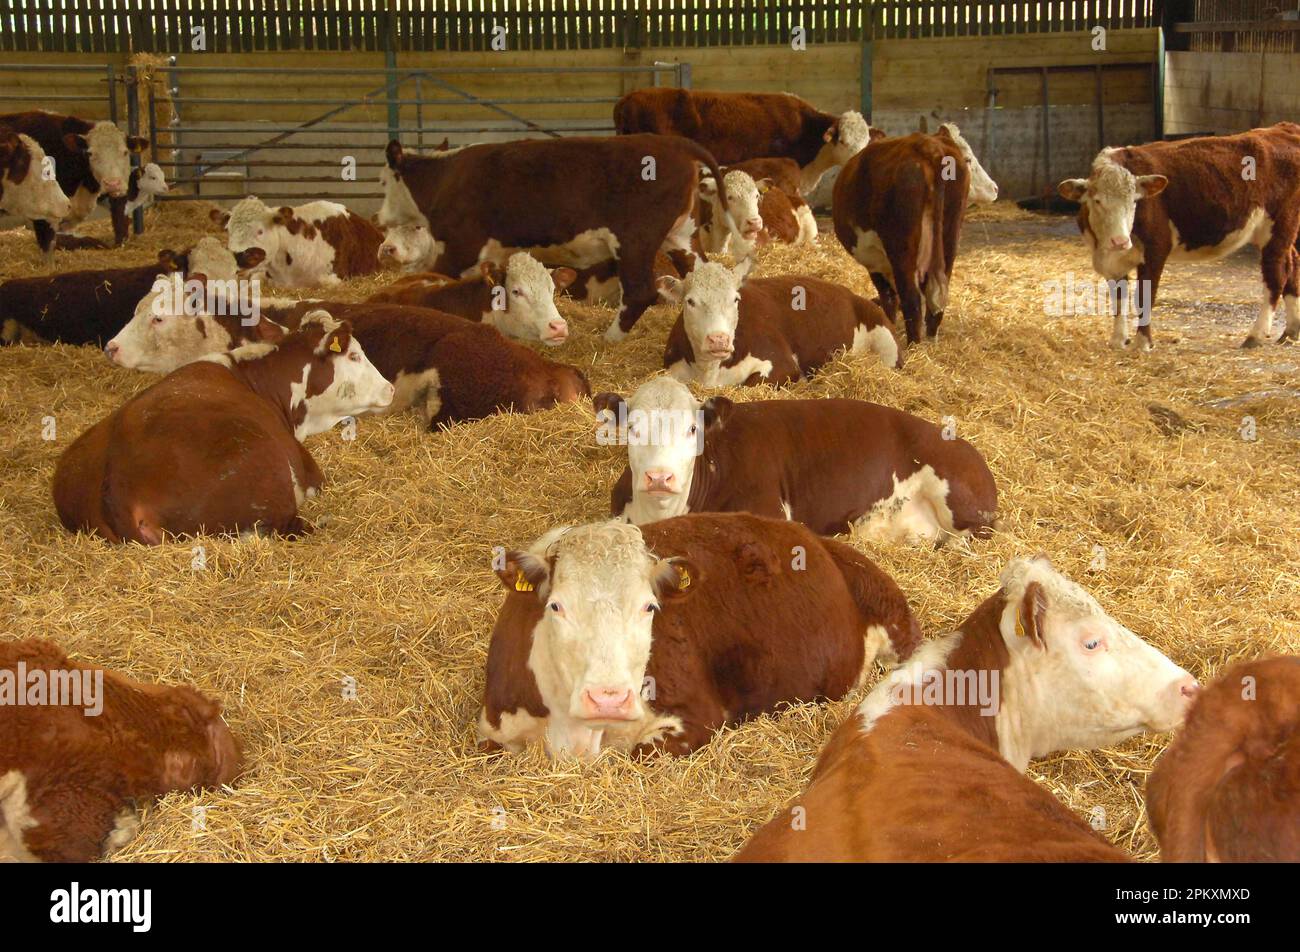 Domestic cattle, Hereford herd, in straw yard, Derbyshire, England, Great Britain Stock Photo